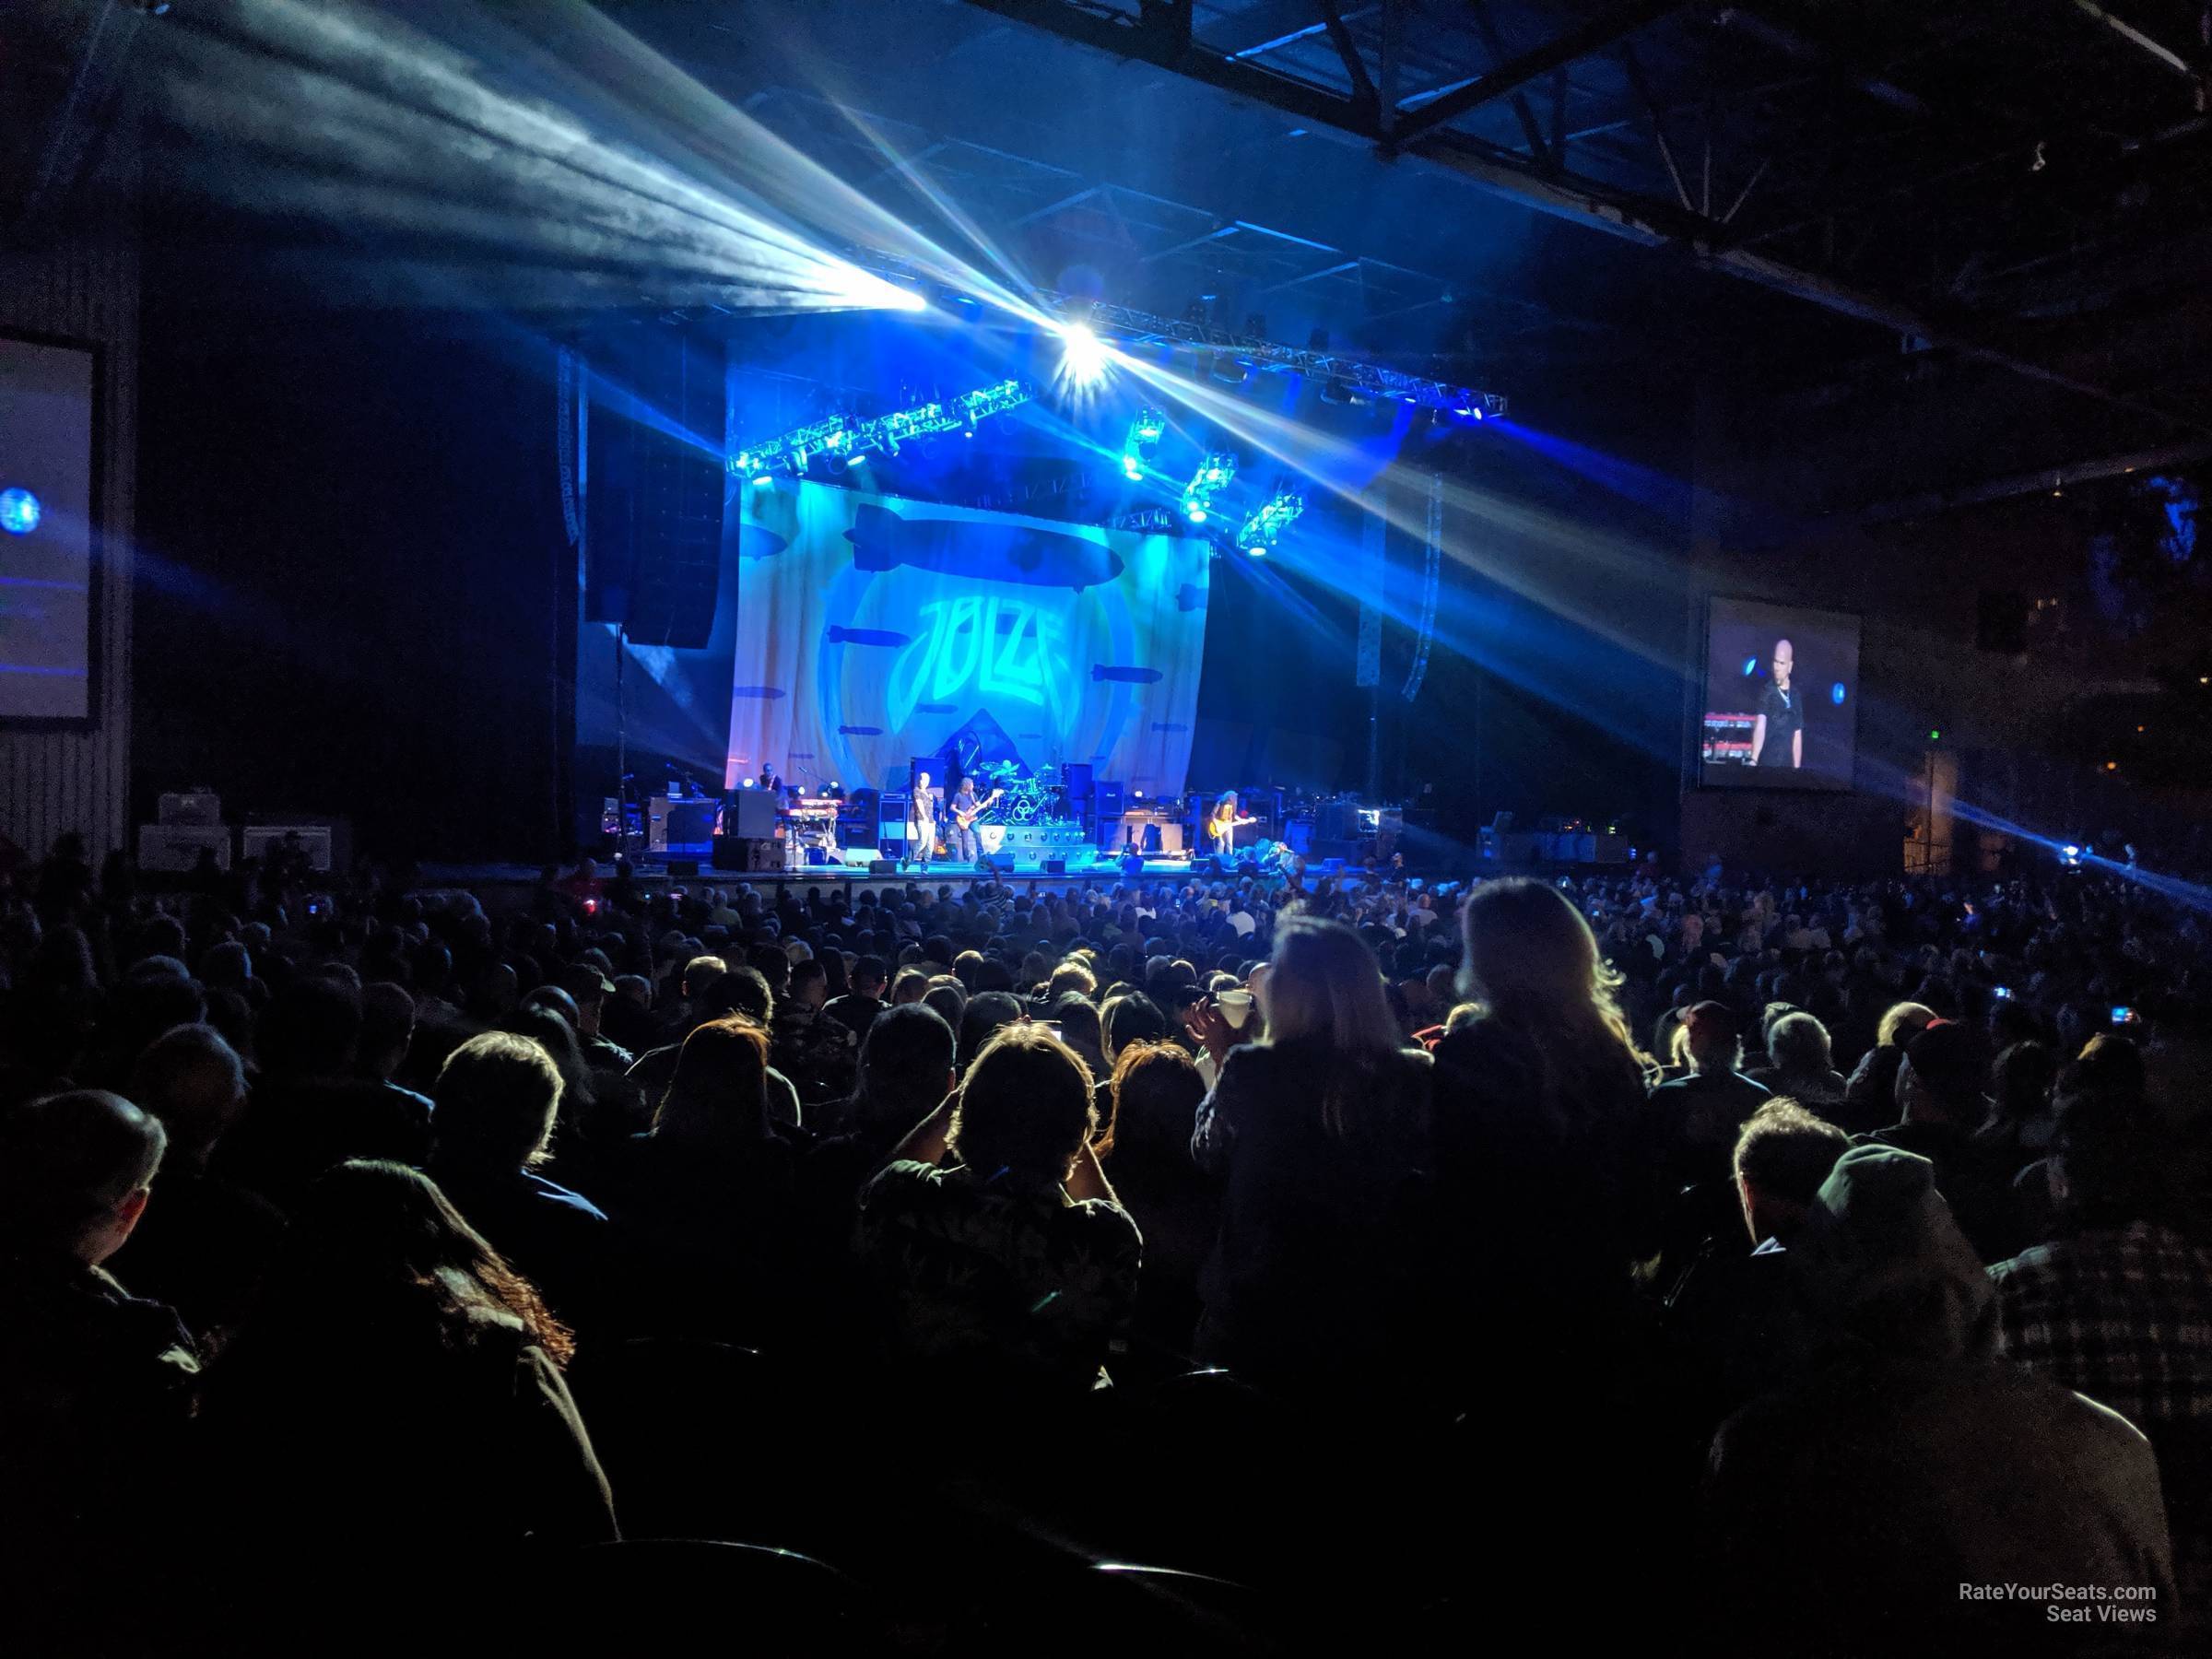 section 106, row w seat view  - concord pavilion